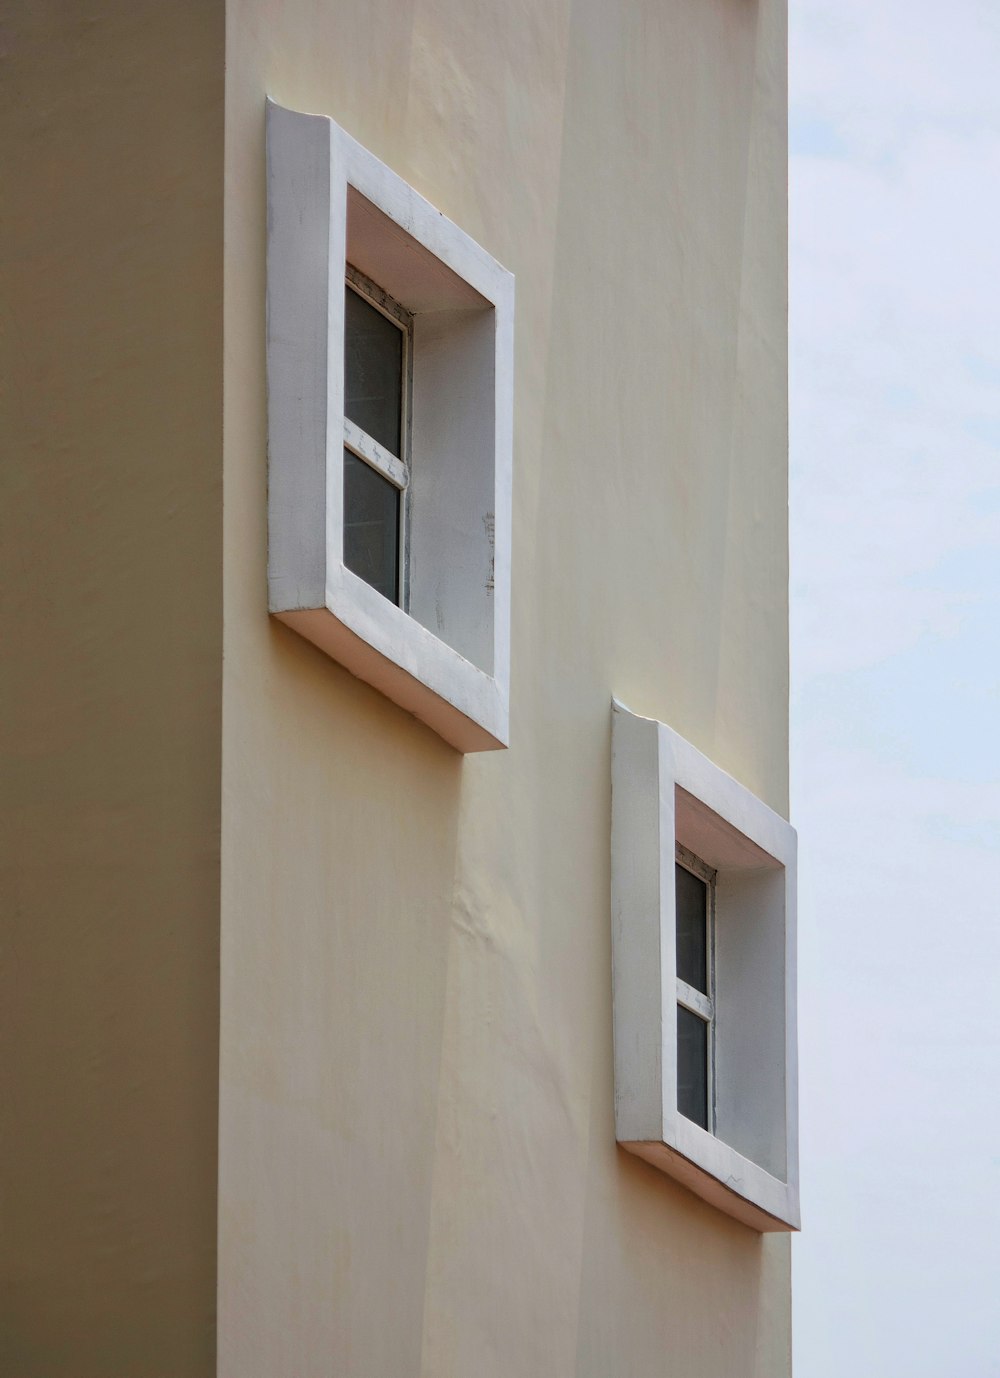 two windows on the side of a building